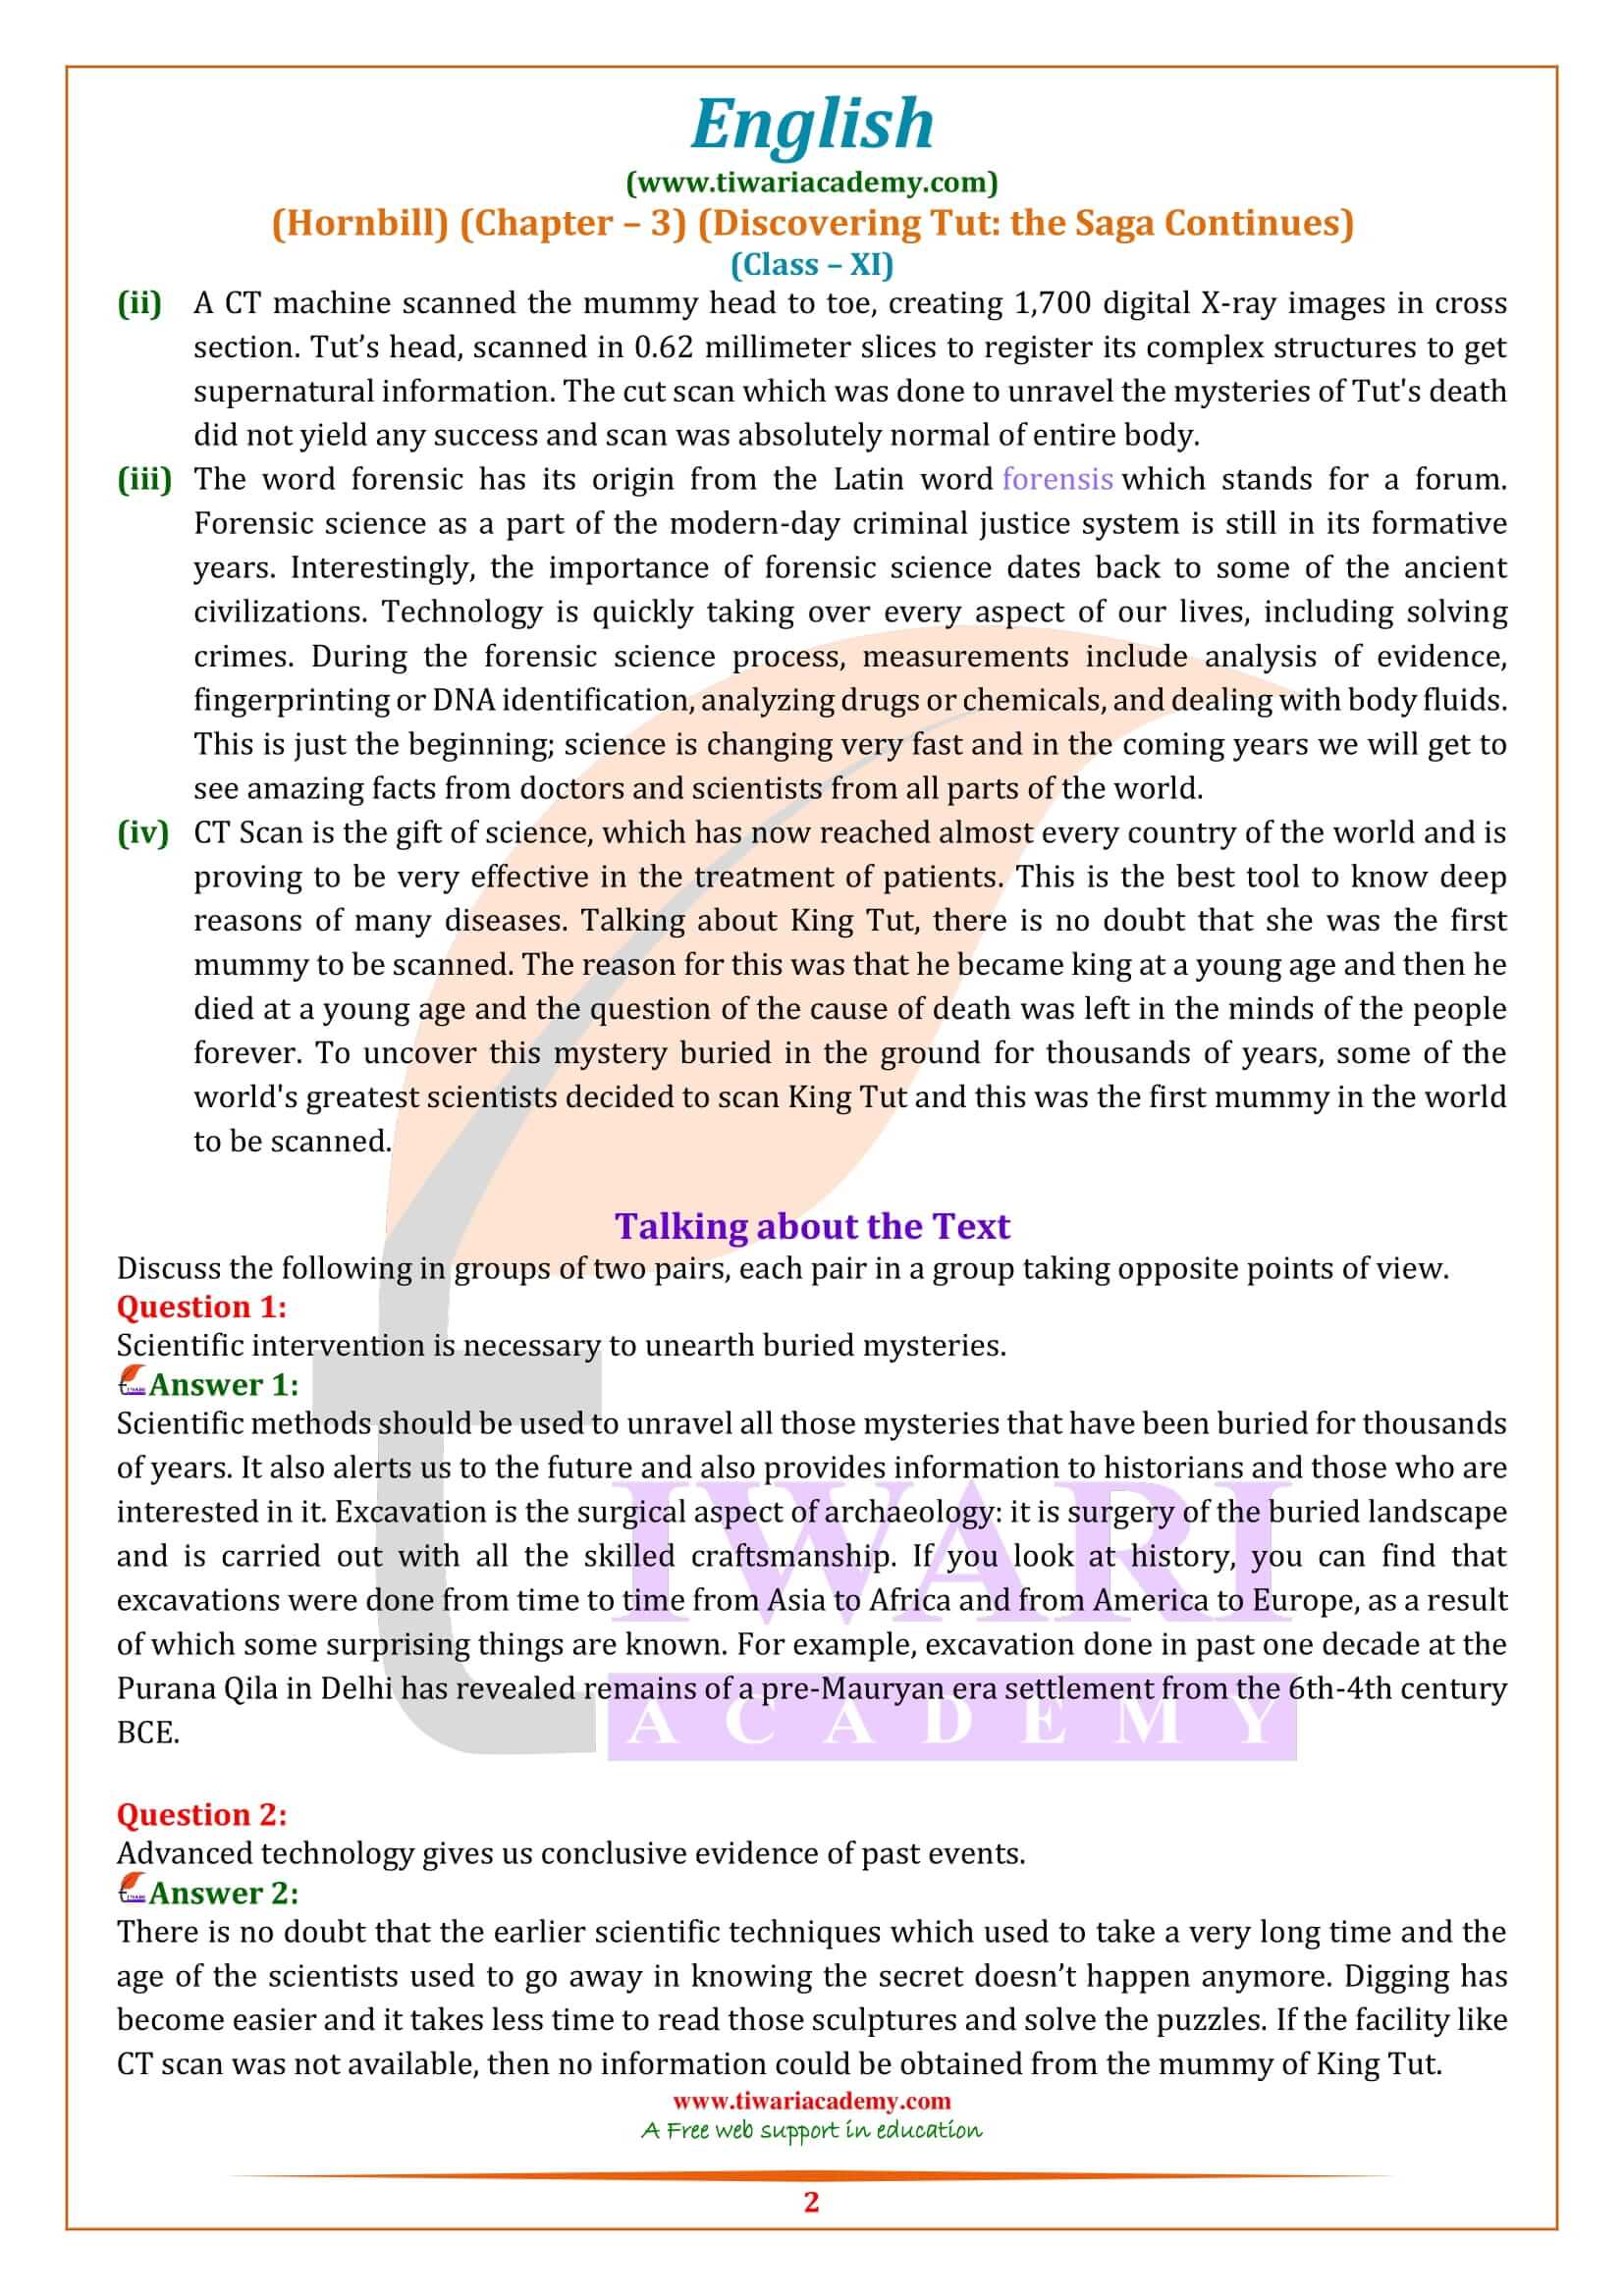 NCERT Solutions for Class 11 English Hornbill Chapter 3 Discovering Tut